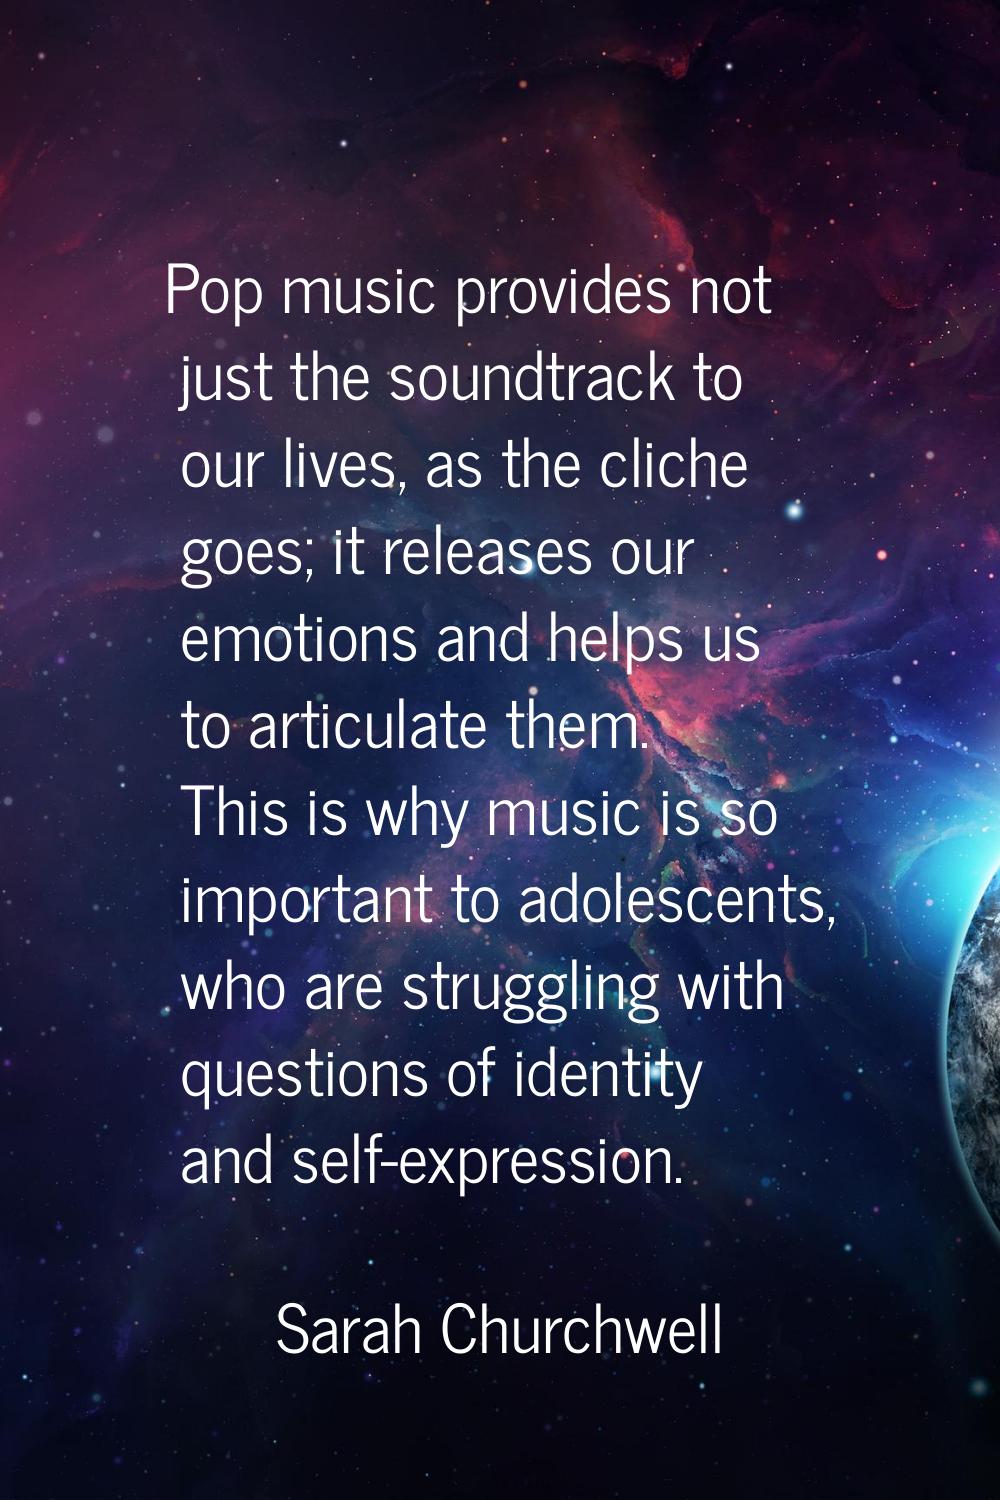 Pop music provides not just the soundtrack to our lives, as the cliche goes; it releases our emotio